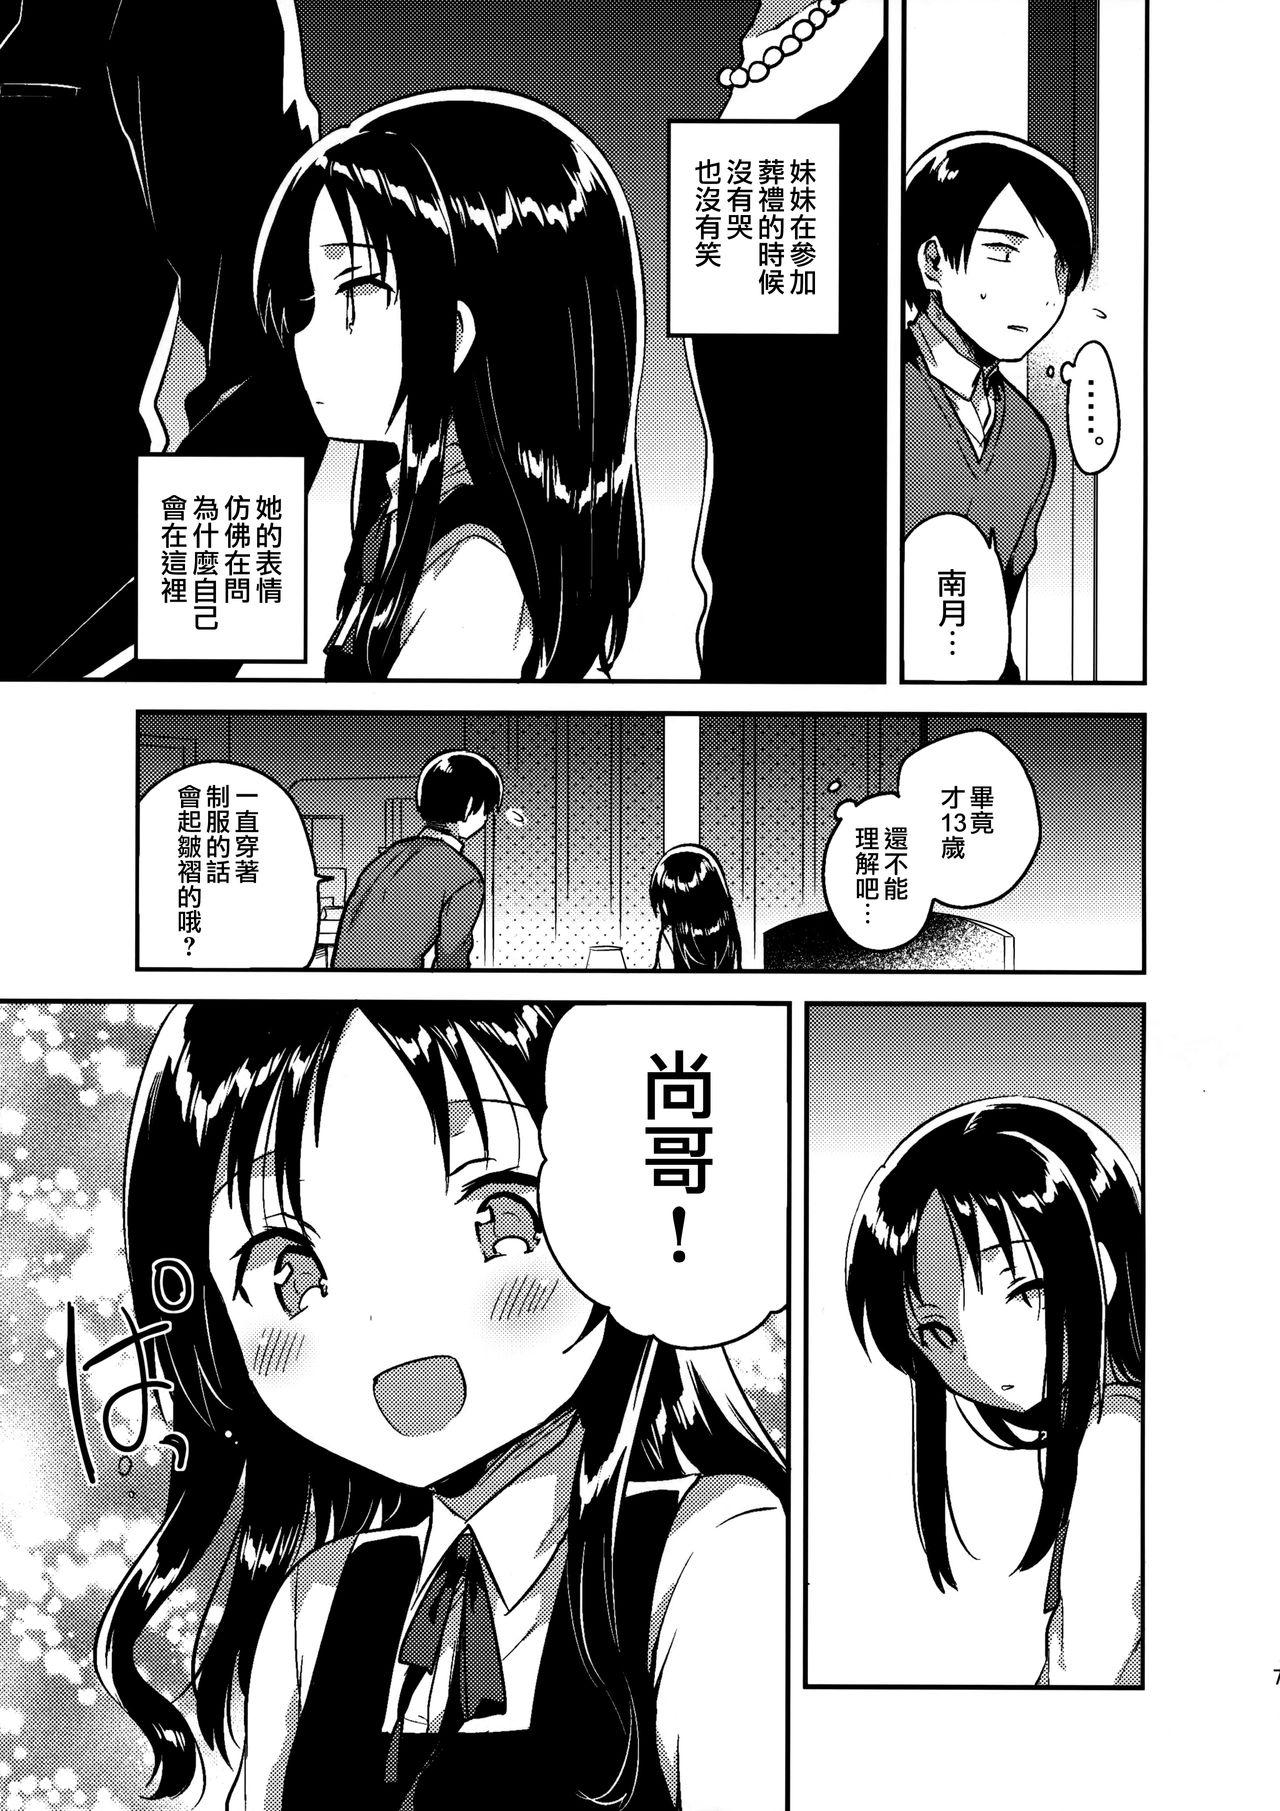 Blowing Onii-chan no Osoushiki Gays - Page 7